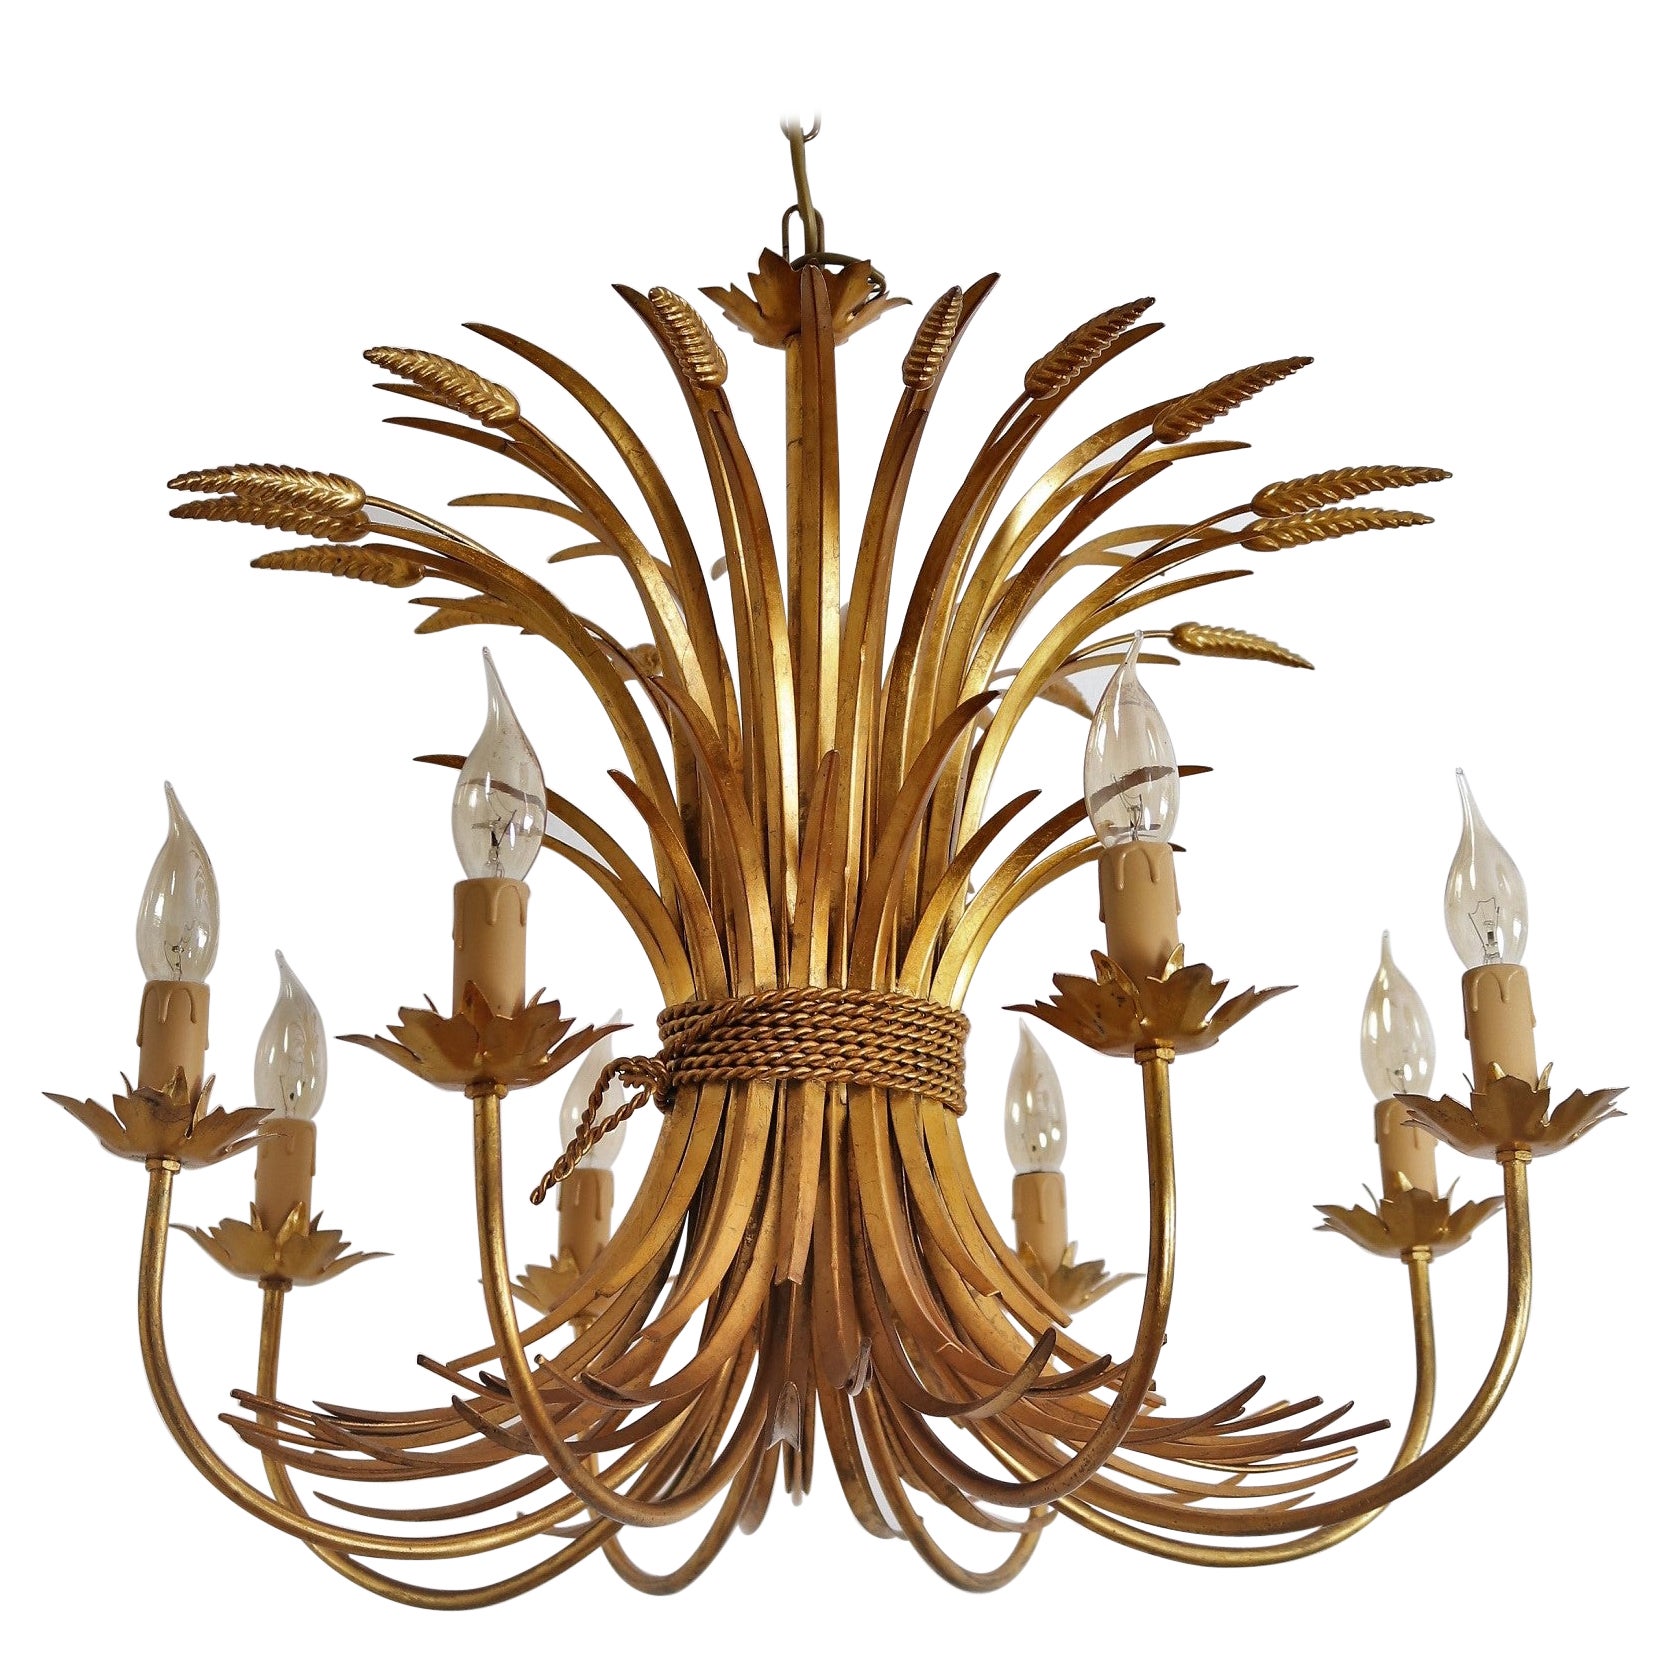 Italian Midcentury 8-Arm Gilt Chandelier with Wheat and Leaves, 1960s